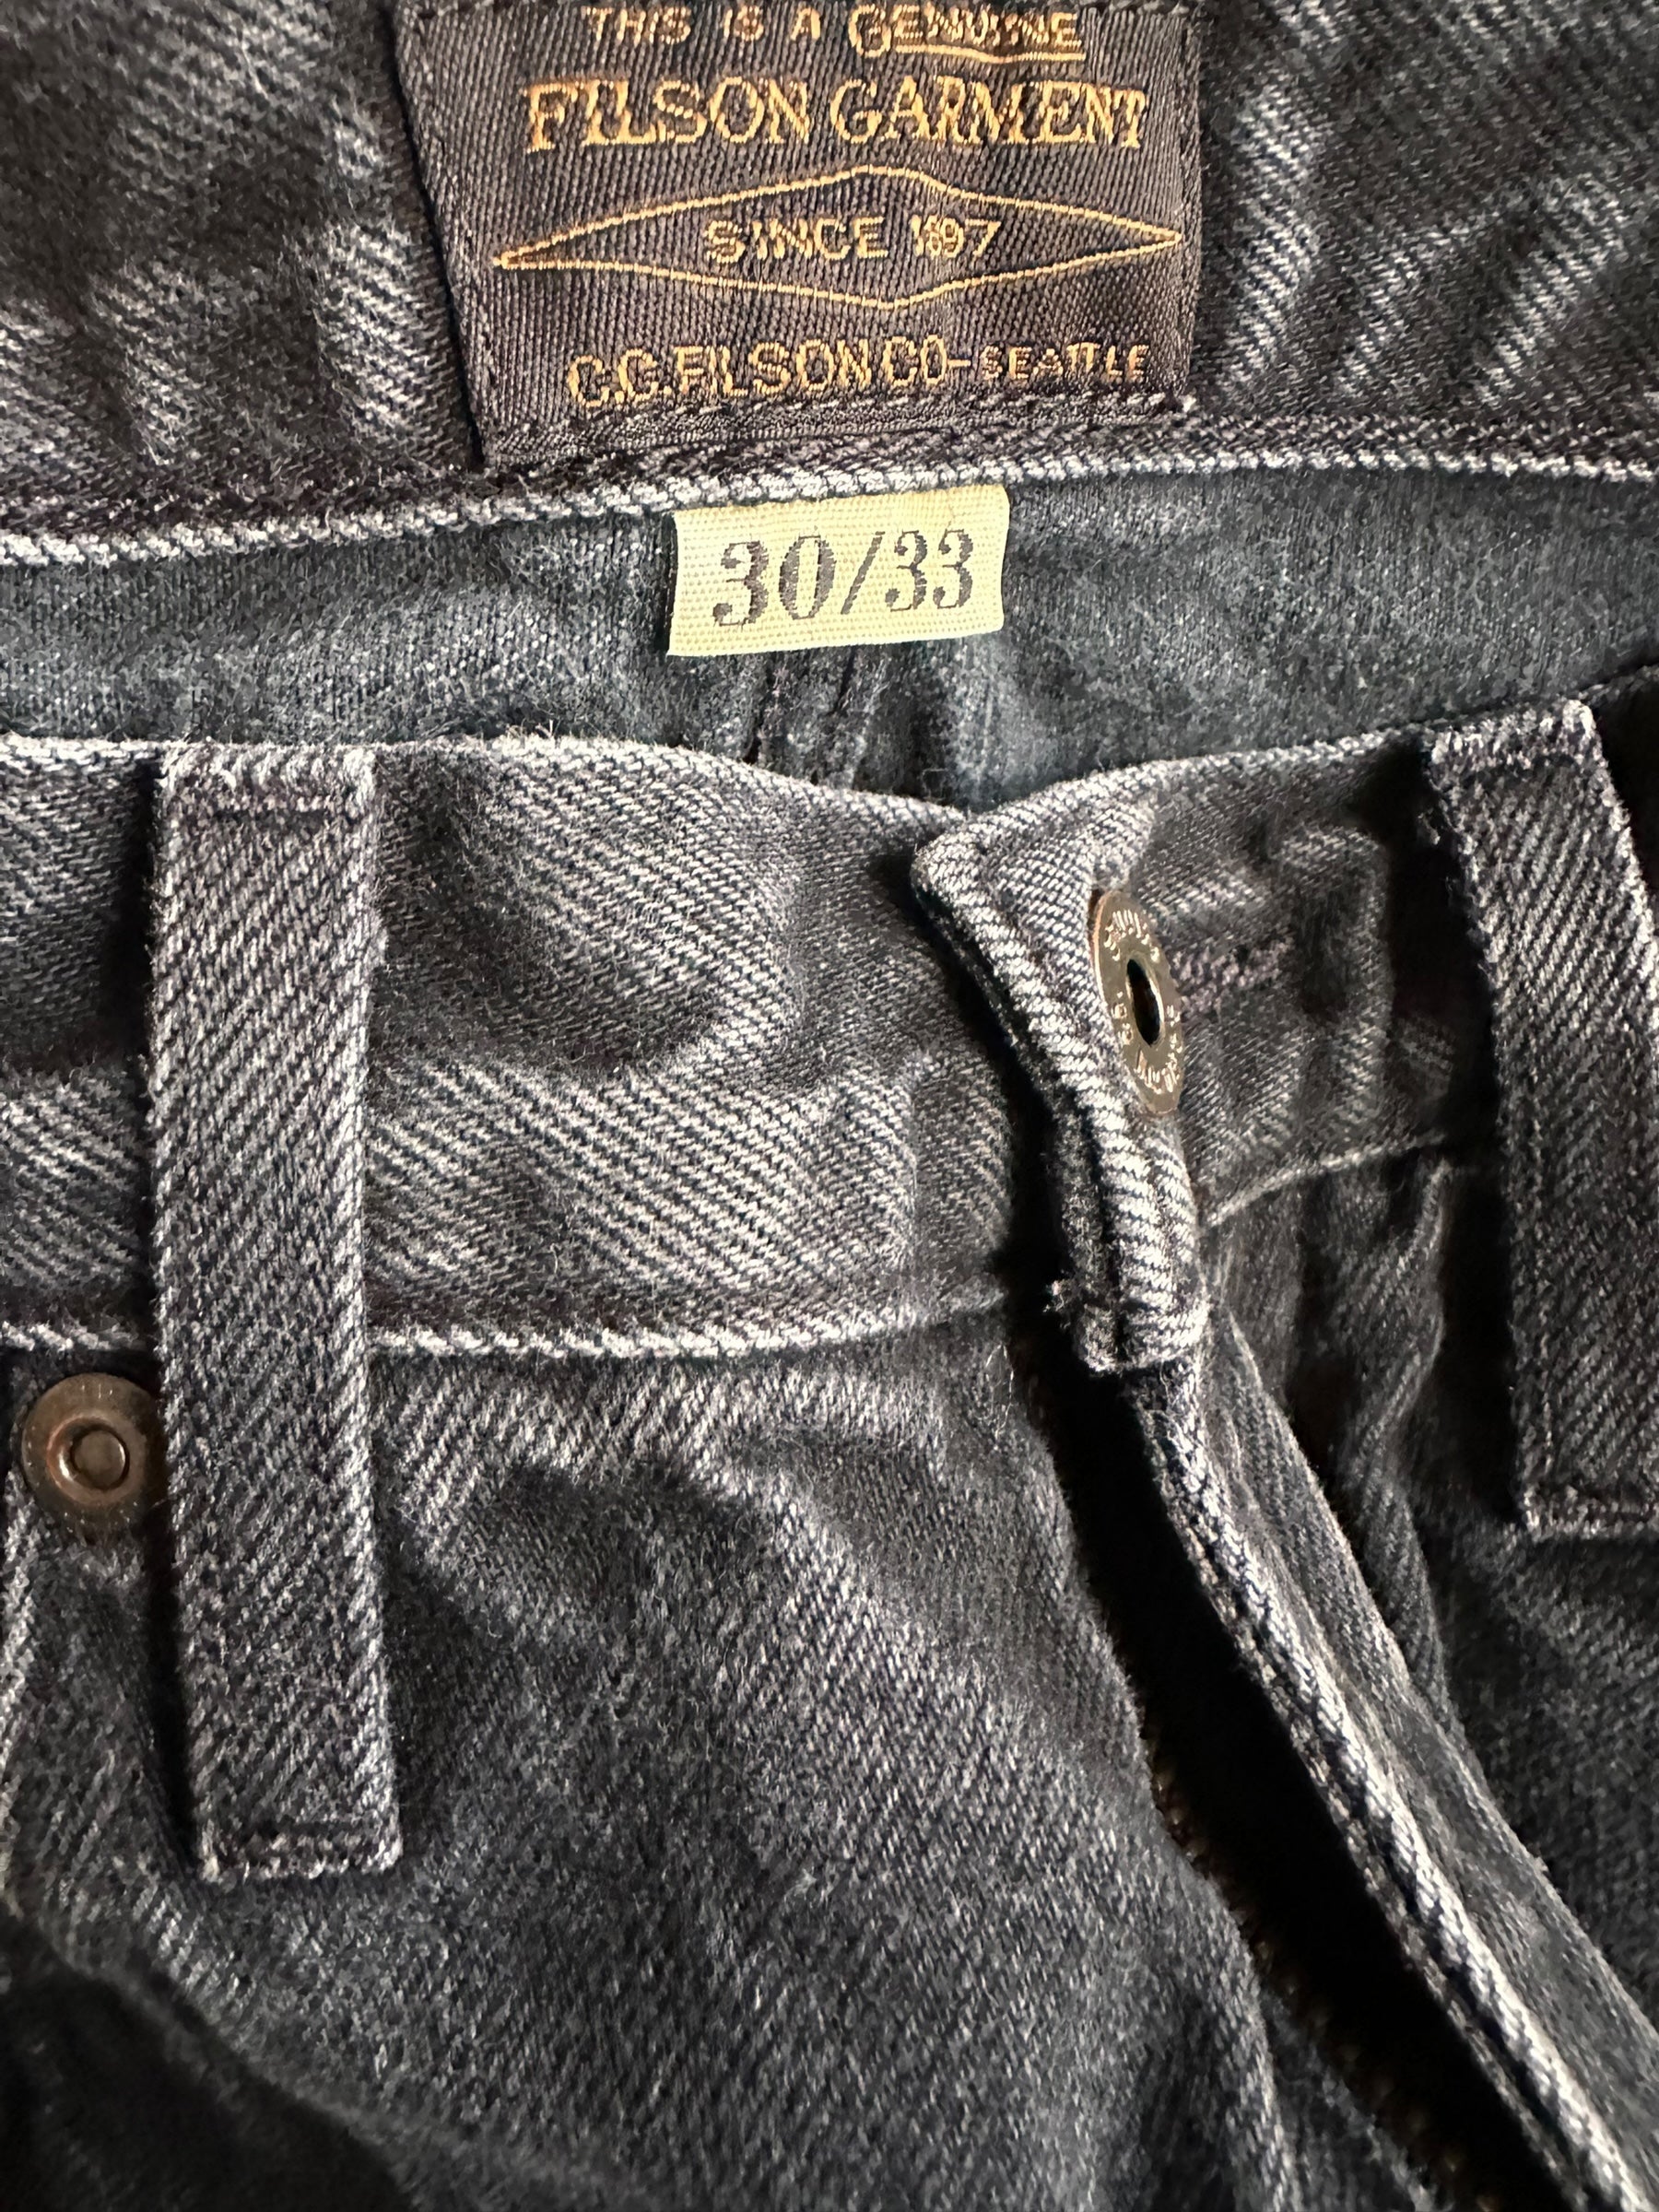 Sizing Tag View of Black Filson Jeans W31 |  Filson Dungarees | Filson Workwear Seattle